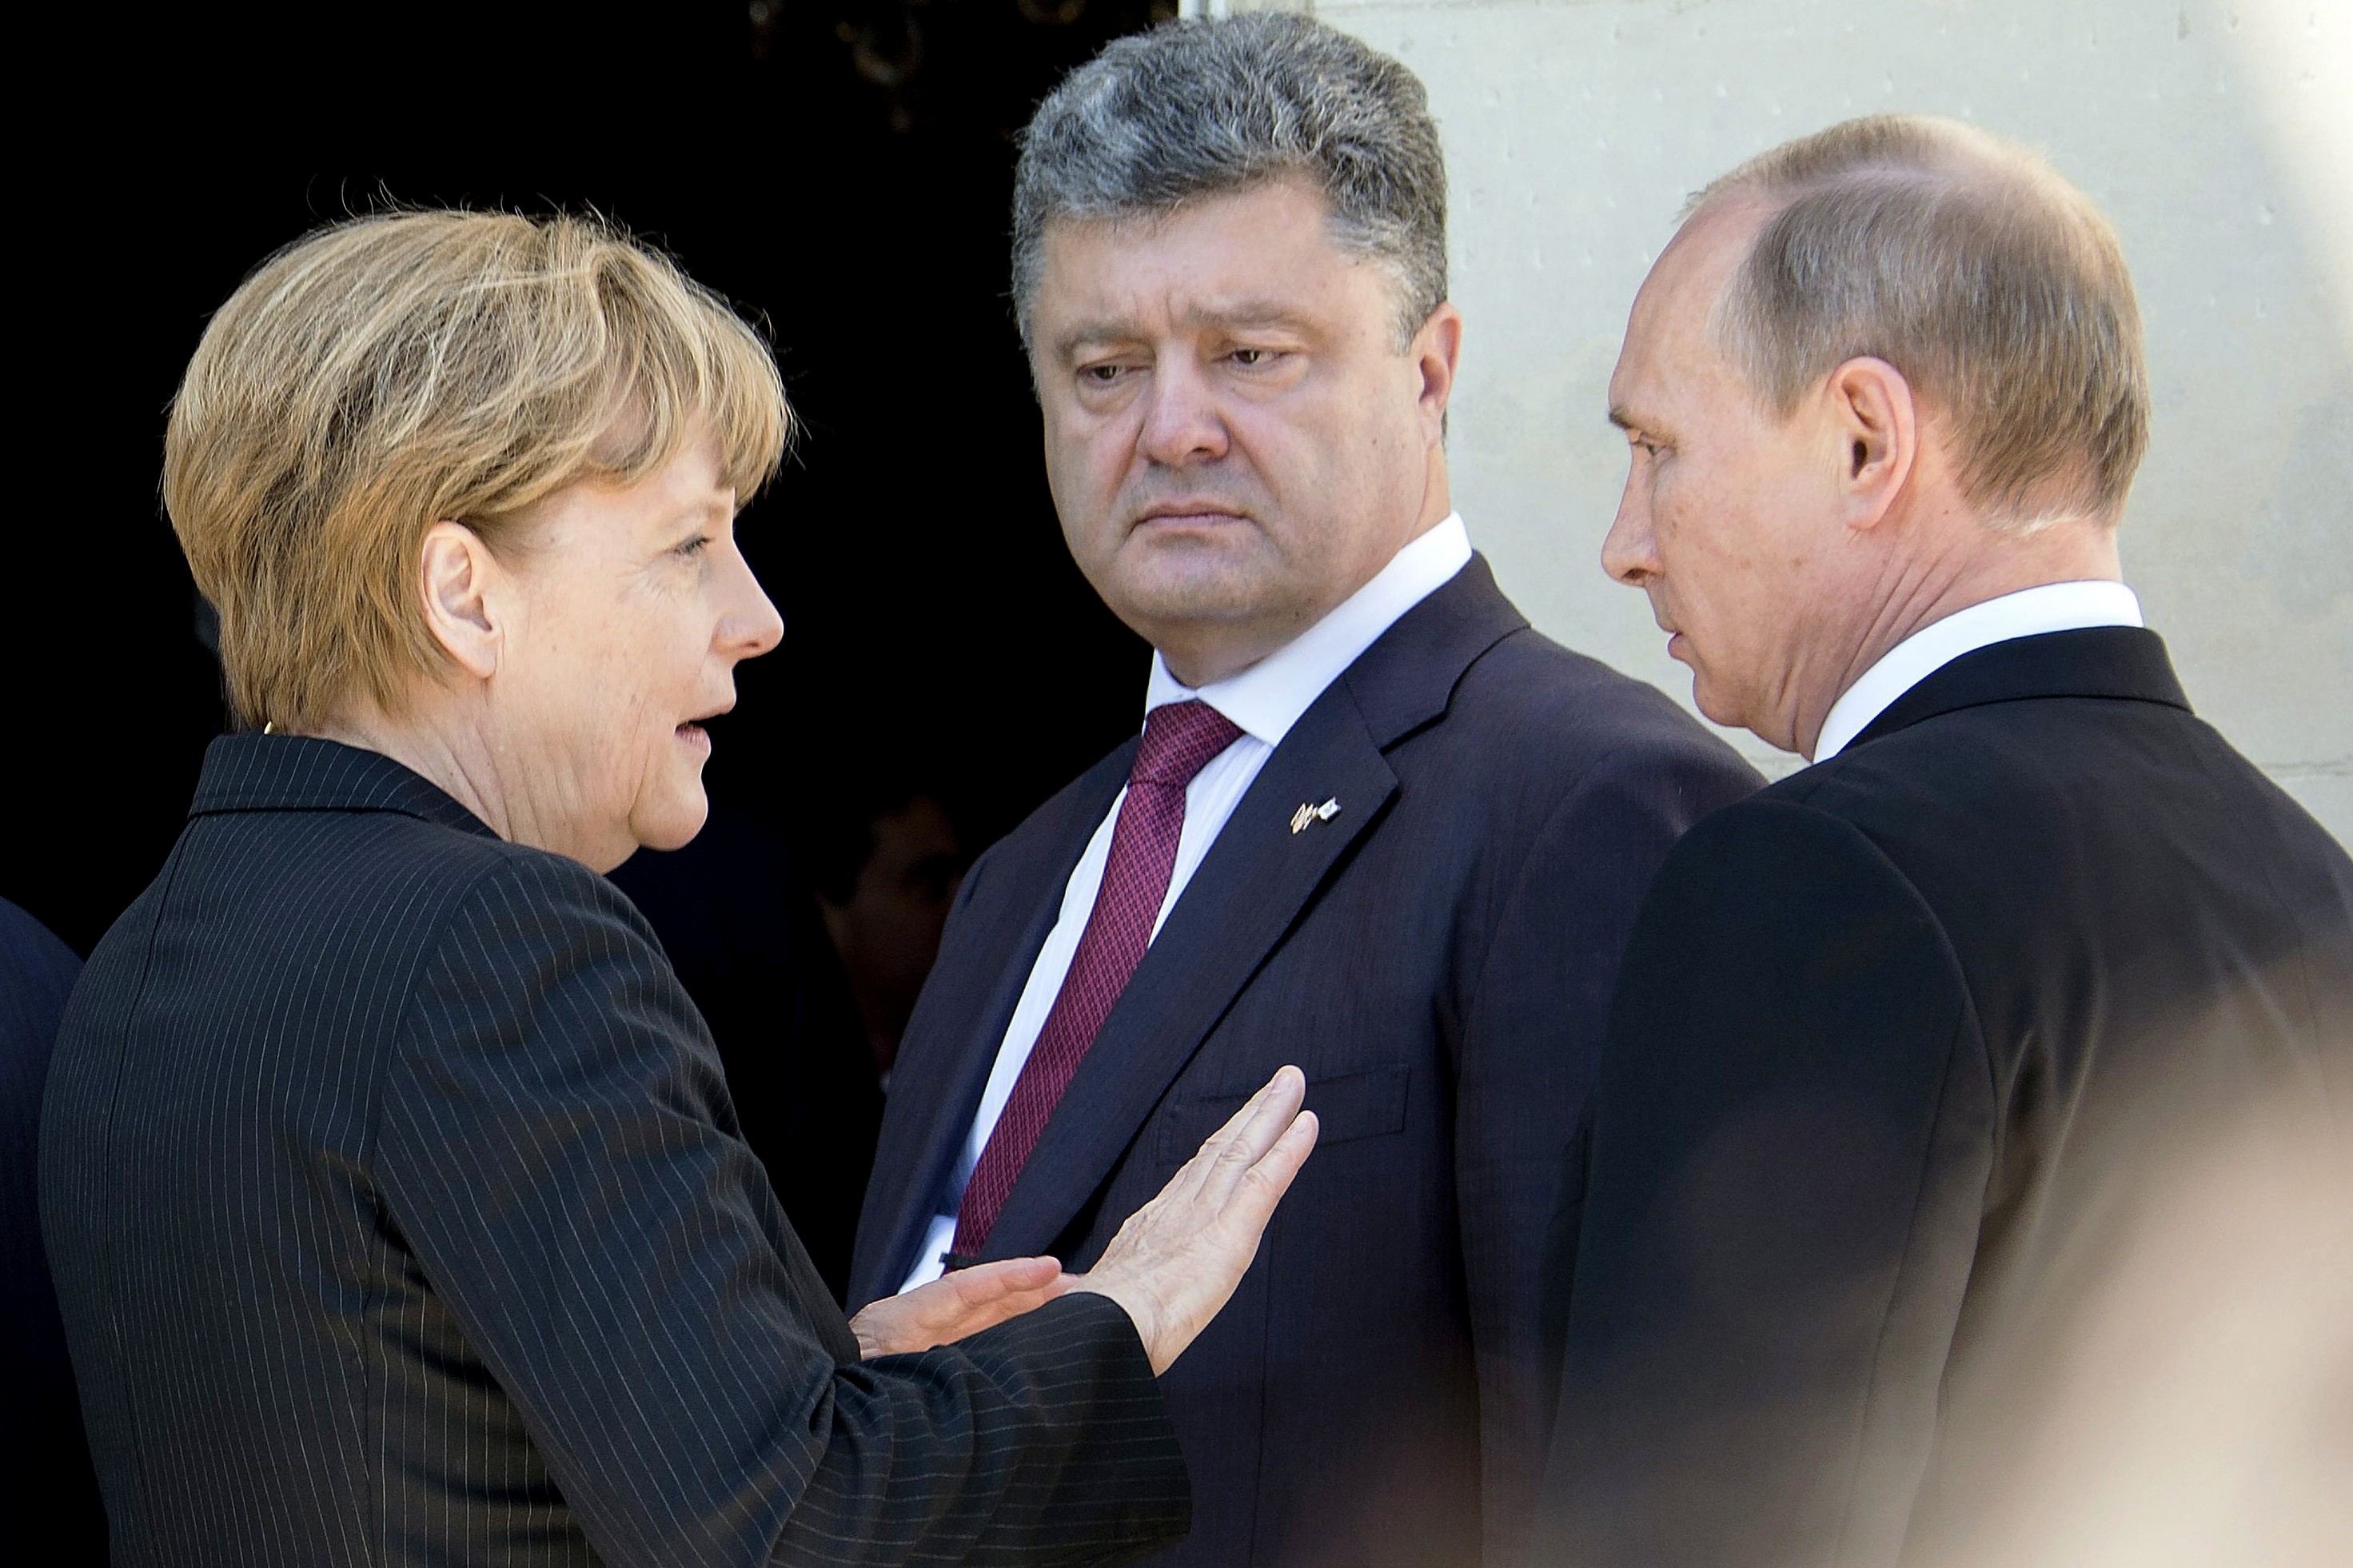 epa04242302 A handout photo providede by the German government (Bundesregierung) press service on 06 June 2014 of German Chancellor Angela Merkel (L), Ukrainian president-elect Petro Poroshenko (C) and Russia's president Vladimir Putin (R) as they meet for an official meal on occasion of the 70th anniversary of the Allied tropps' landing in the Normandy, in front of the castle of Benouville in Ouistreham, France, 06 June 2014. EPA/Guido Bergmann/BUNDESREGIERUNG/HANDOUT